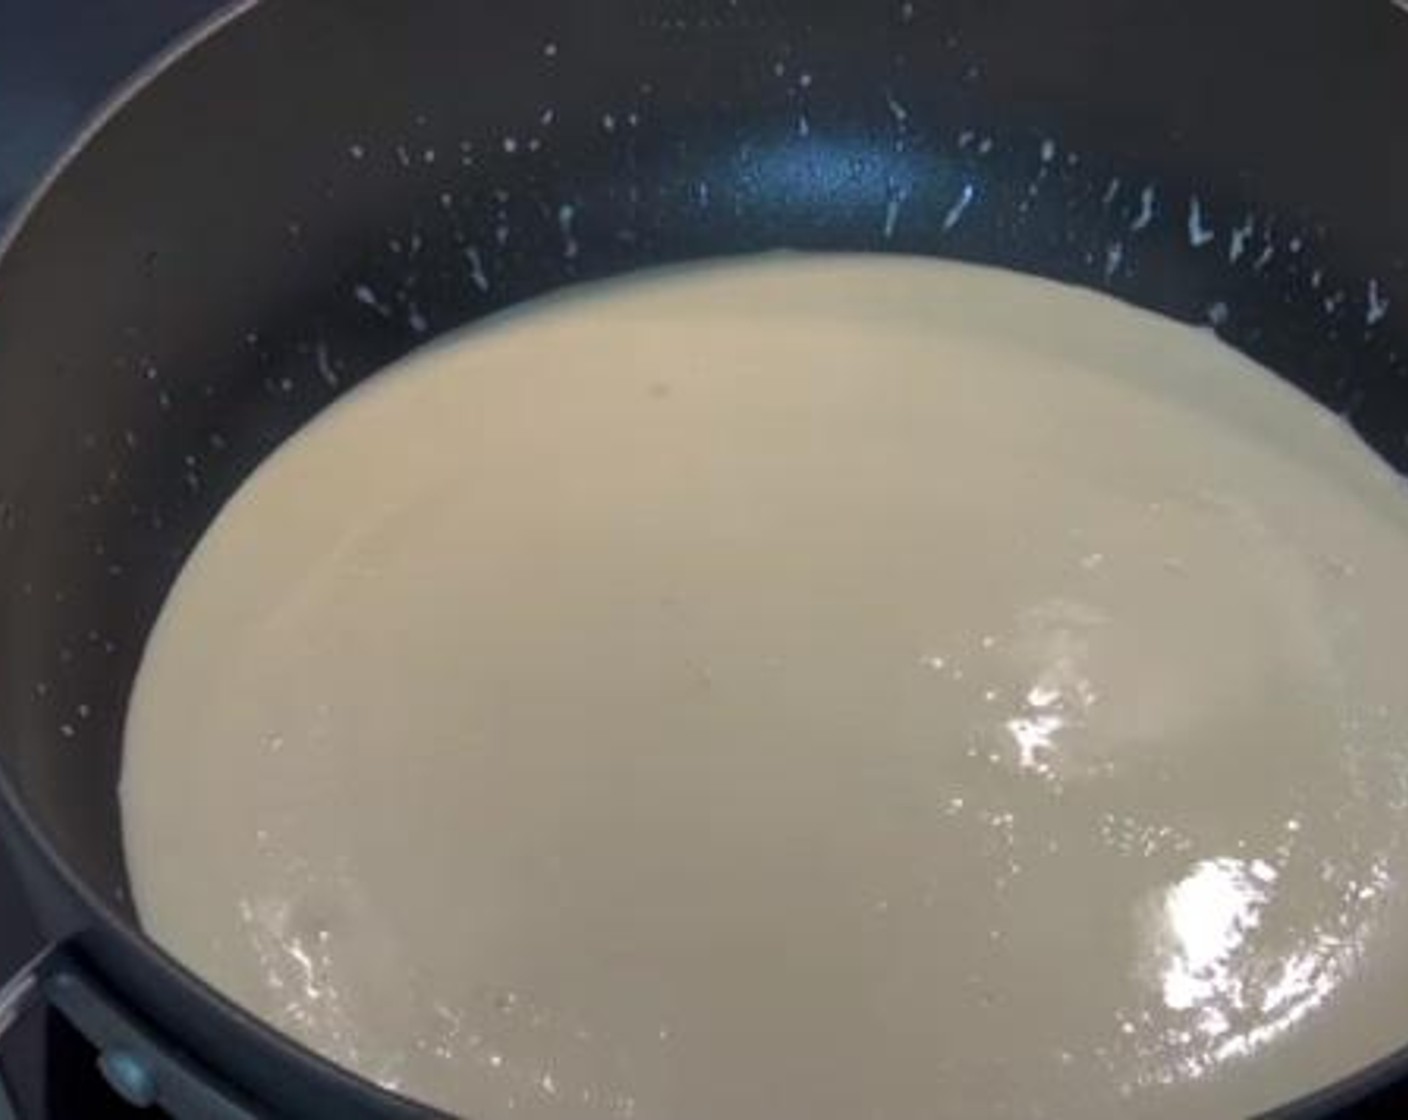 step 2 In a saute pan over medium heat, cook together the Butter (2 Tbsp) and Garlic (4 cloves). Then add in the Whipping Cream (1/2 cup) and allow it to simmer for 5 minutes.